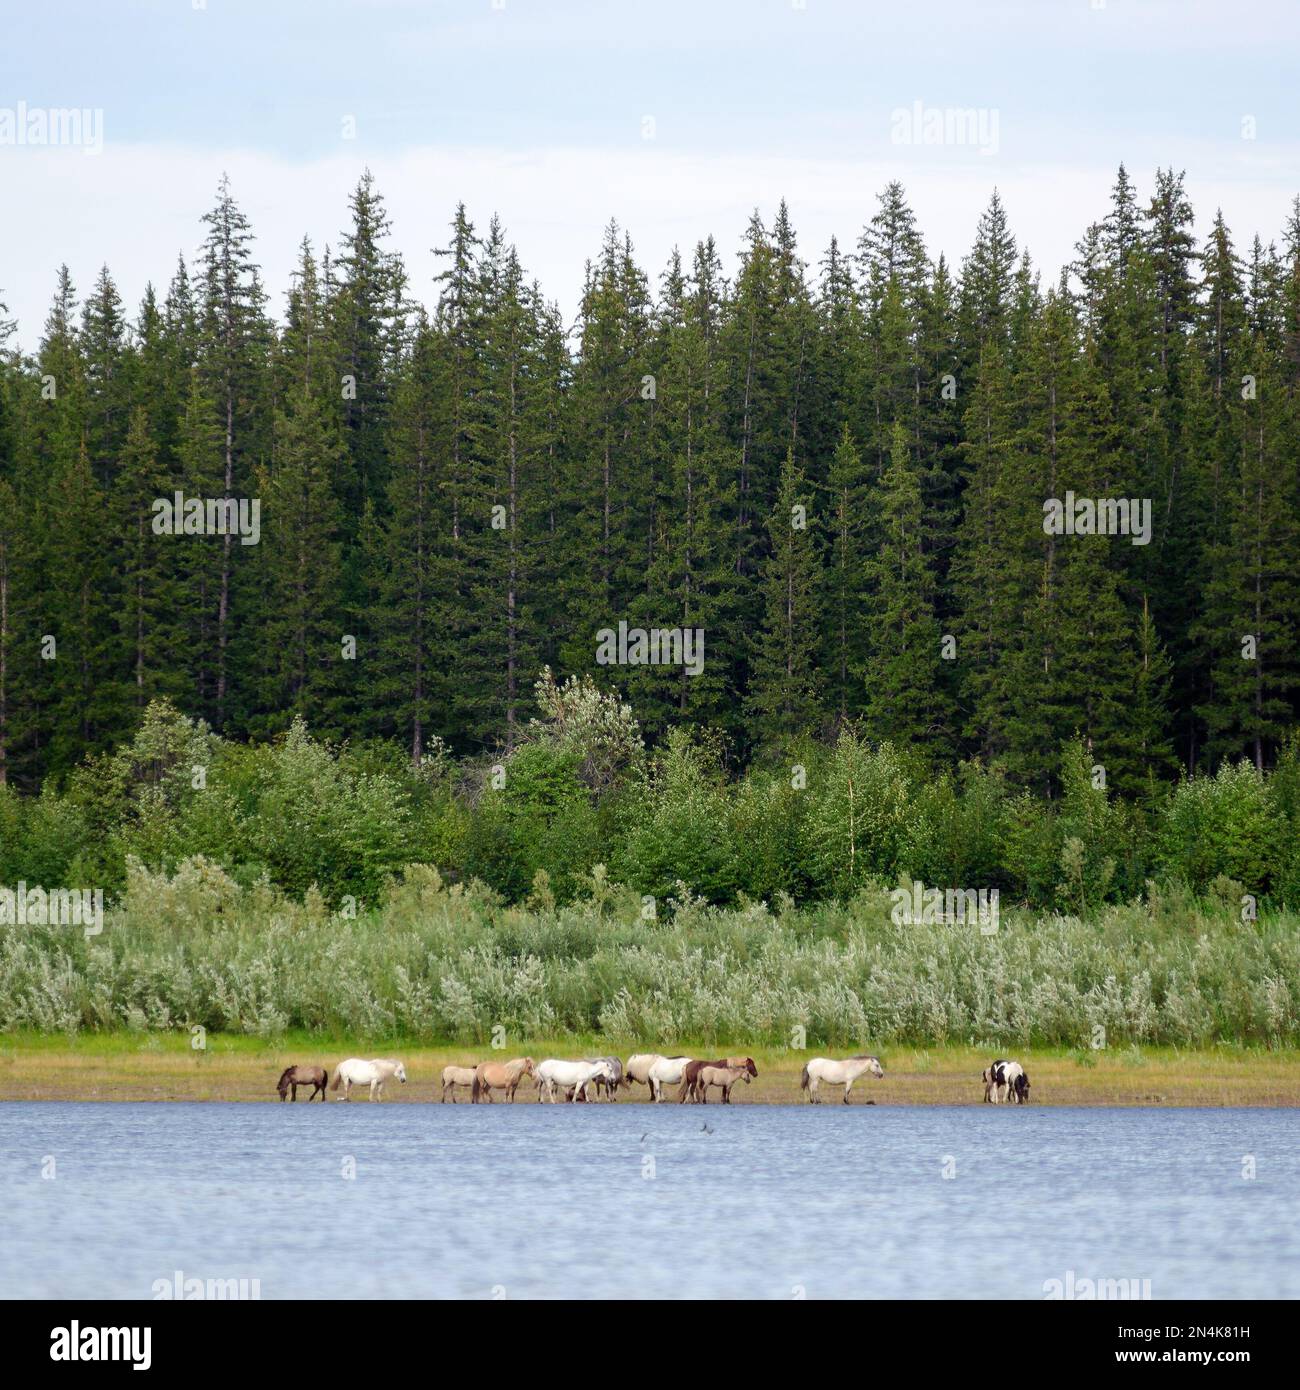 A herd of light Yakut horses is feeding on the banks of the Northern river vilyu on the background of a number of coniferous trees and the usual locat Stock Photo